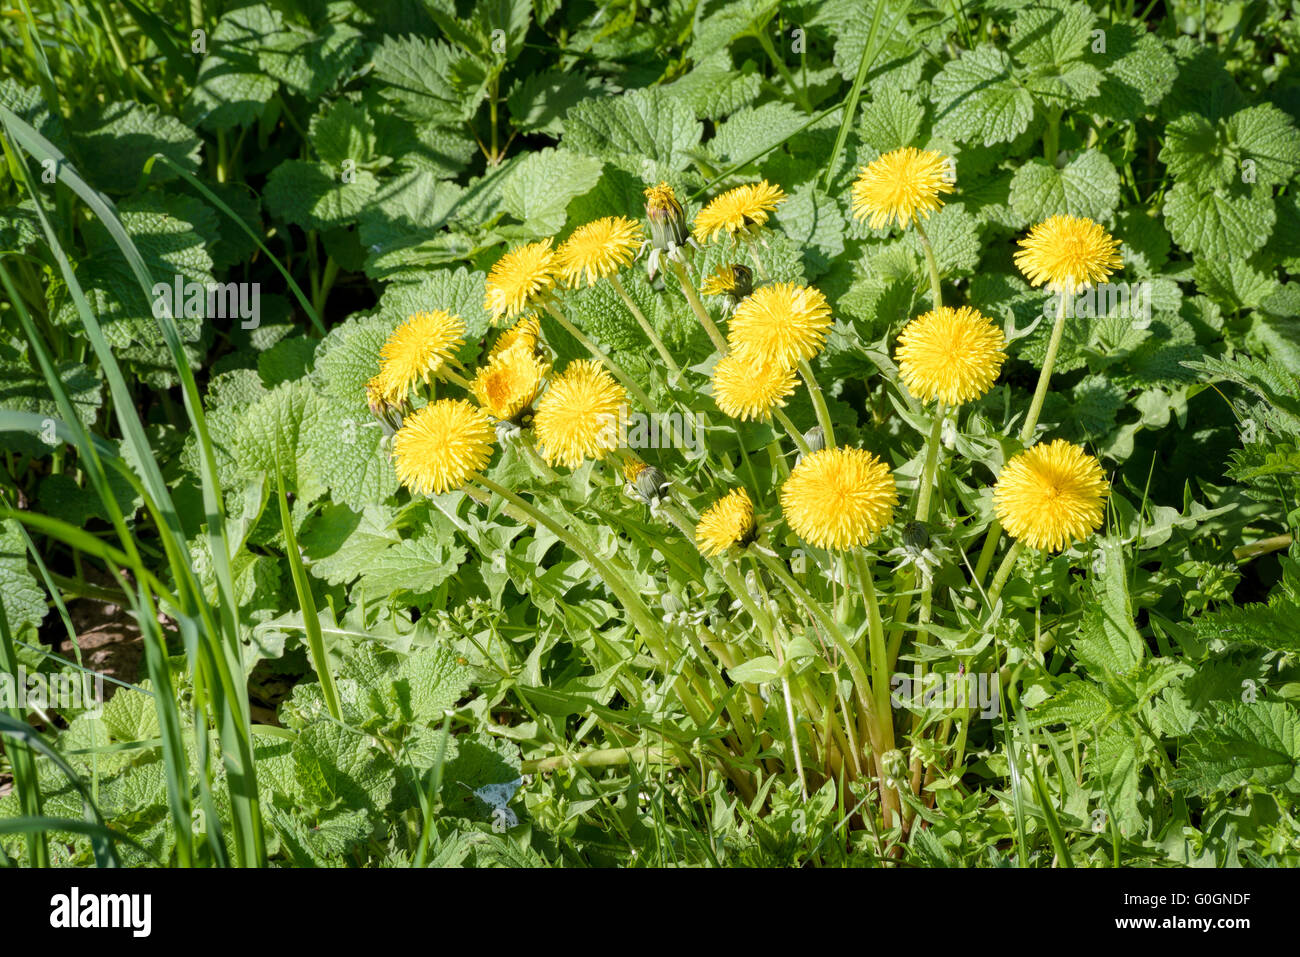 A group of yellow Dandelion flowers and Melissa leaves in the meadow, illuminated by the warm spring sun Stock Photo